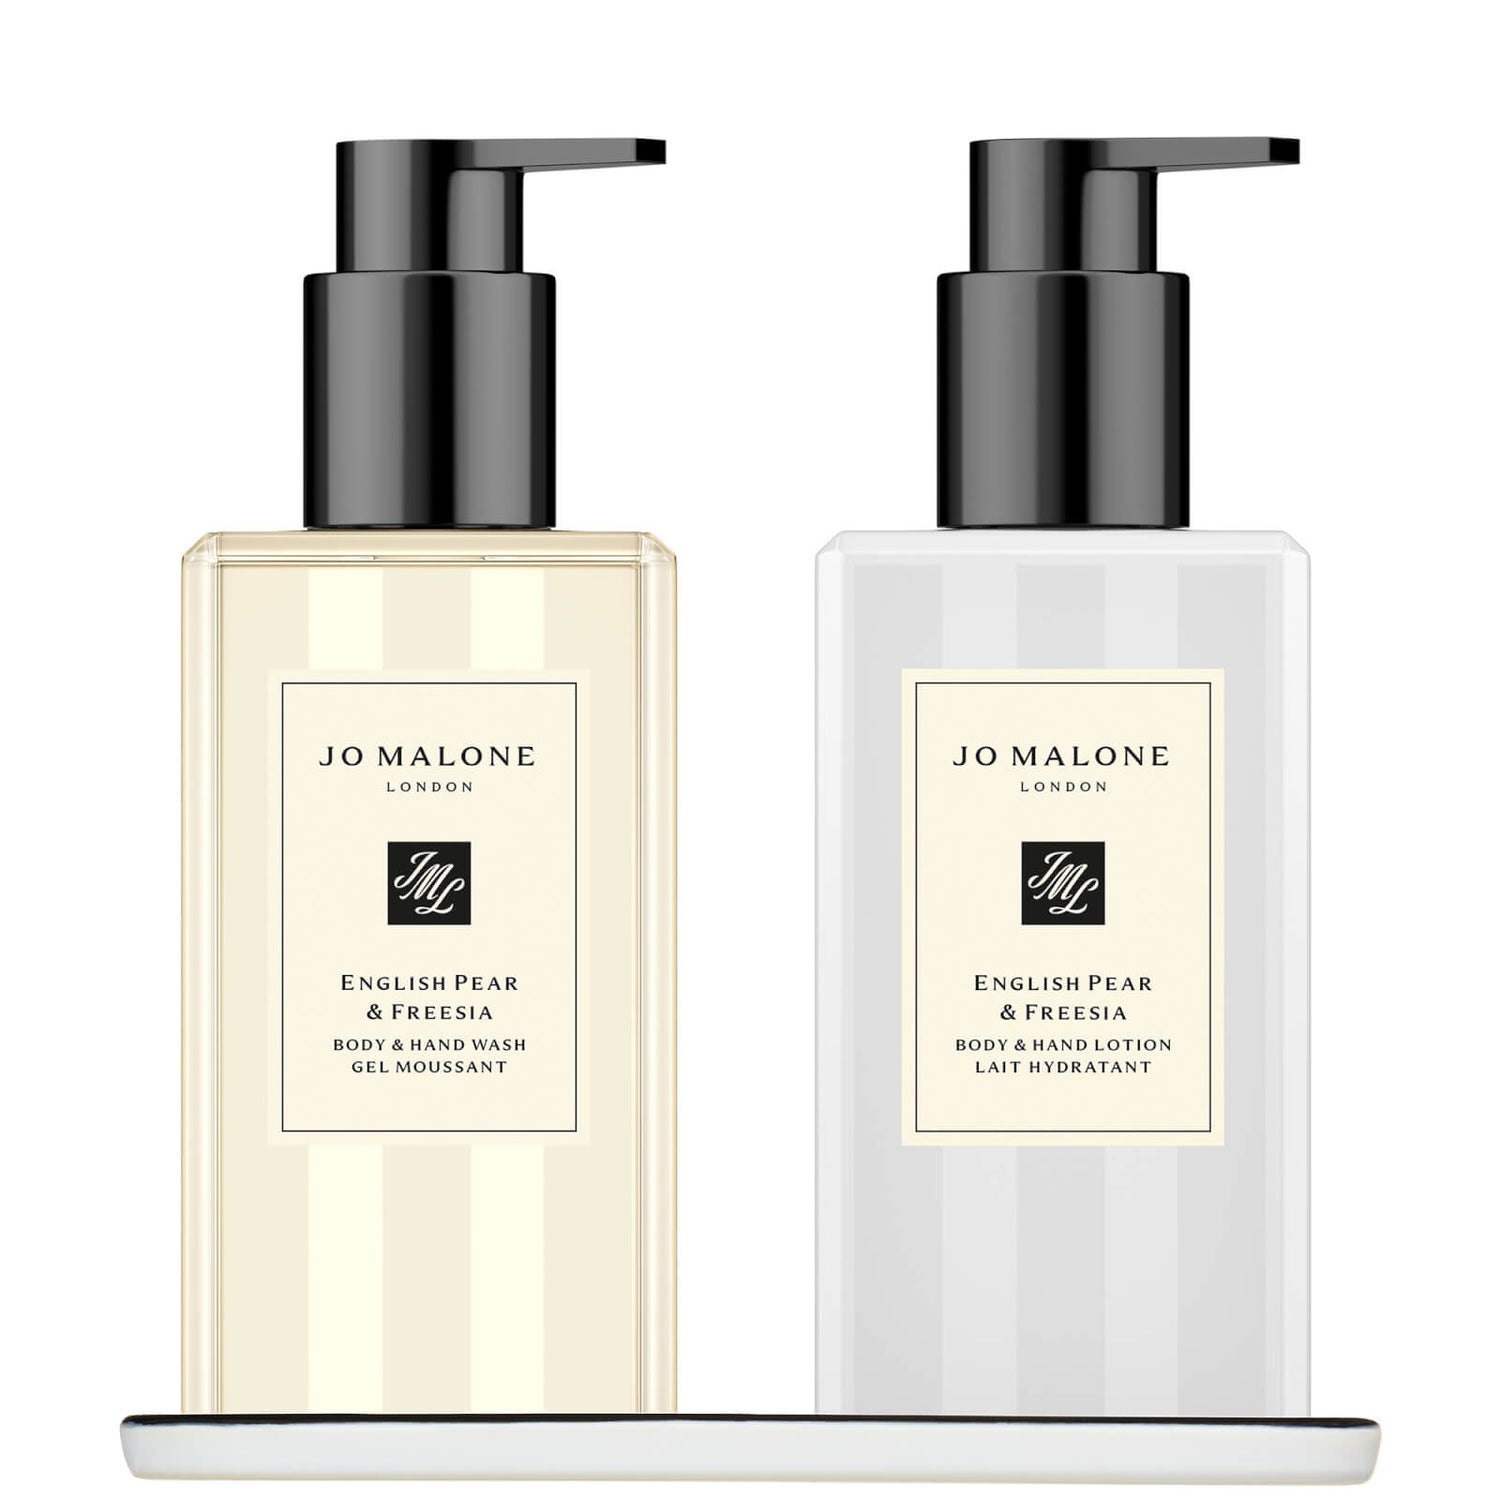 Jo Malone London English Pear and Freesia Bath and Body Collection